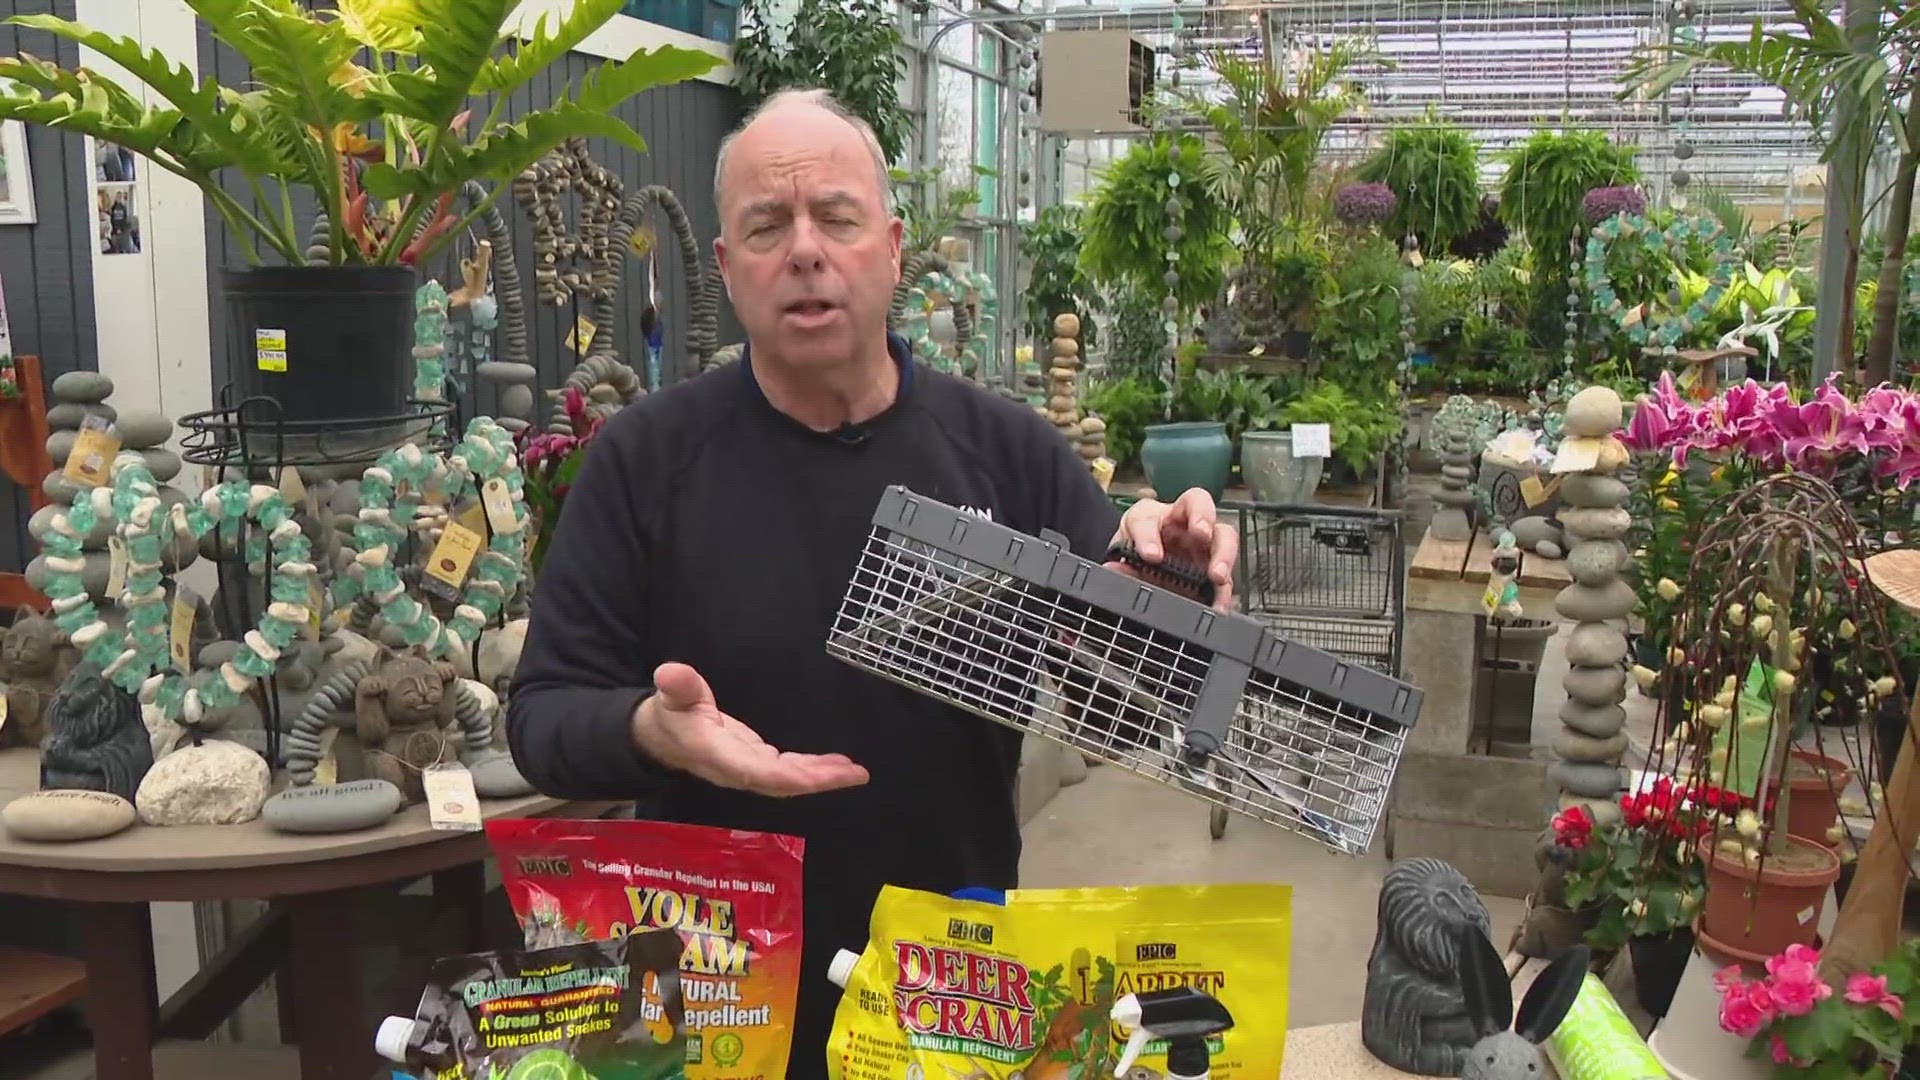 Pat Sullivan has advice on how to deal with animals damaging your garden and lawn plus more spring gardening tips!